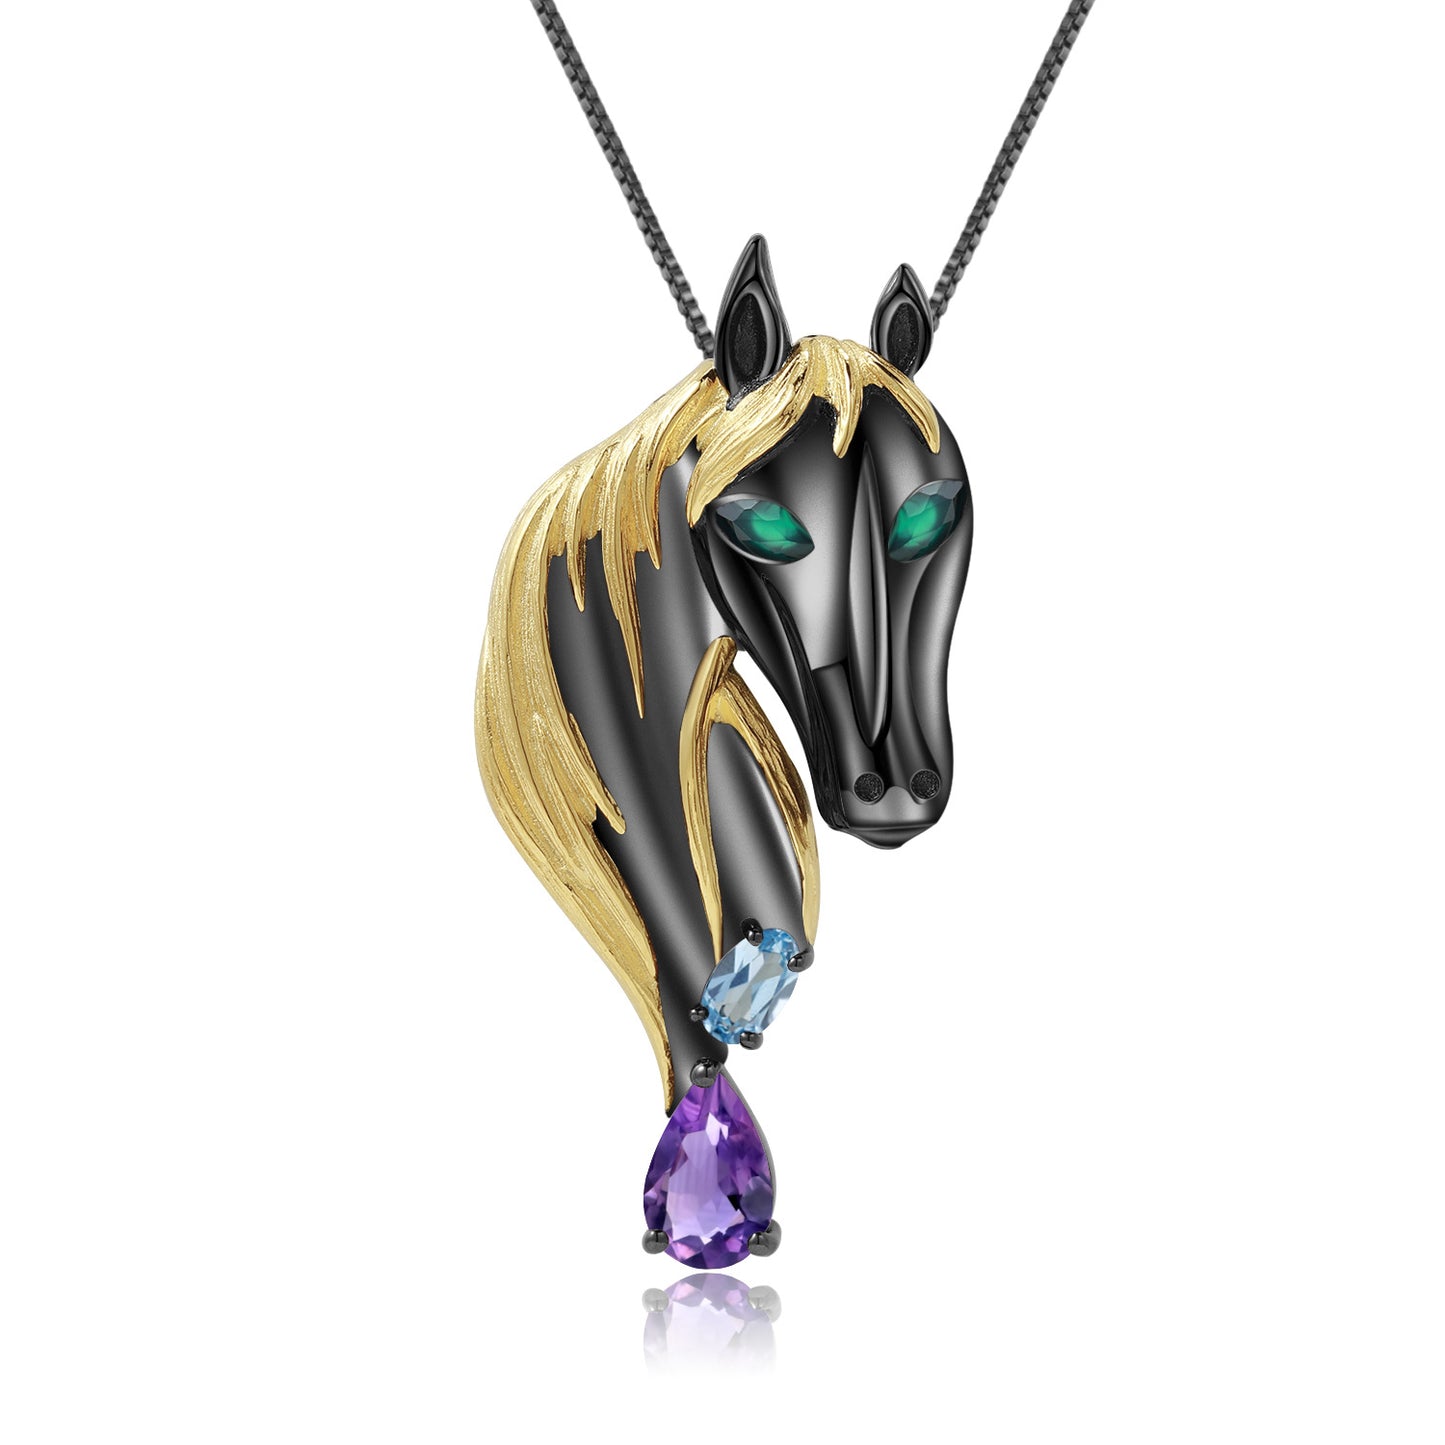 Italian Craft Design Brooch Pendant Dual-use Natural Colourful Gemstone Horse Pendant Silver Necklace for Women